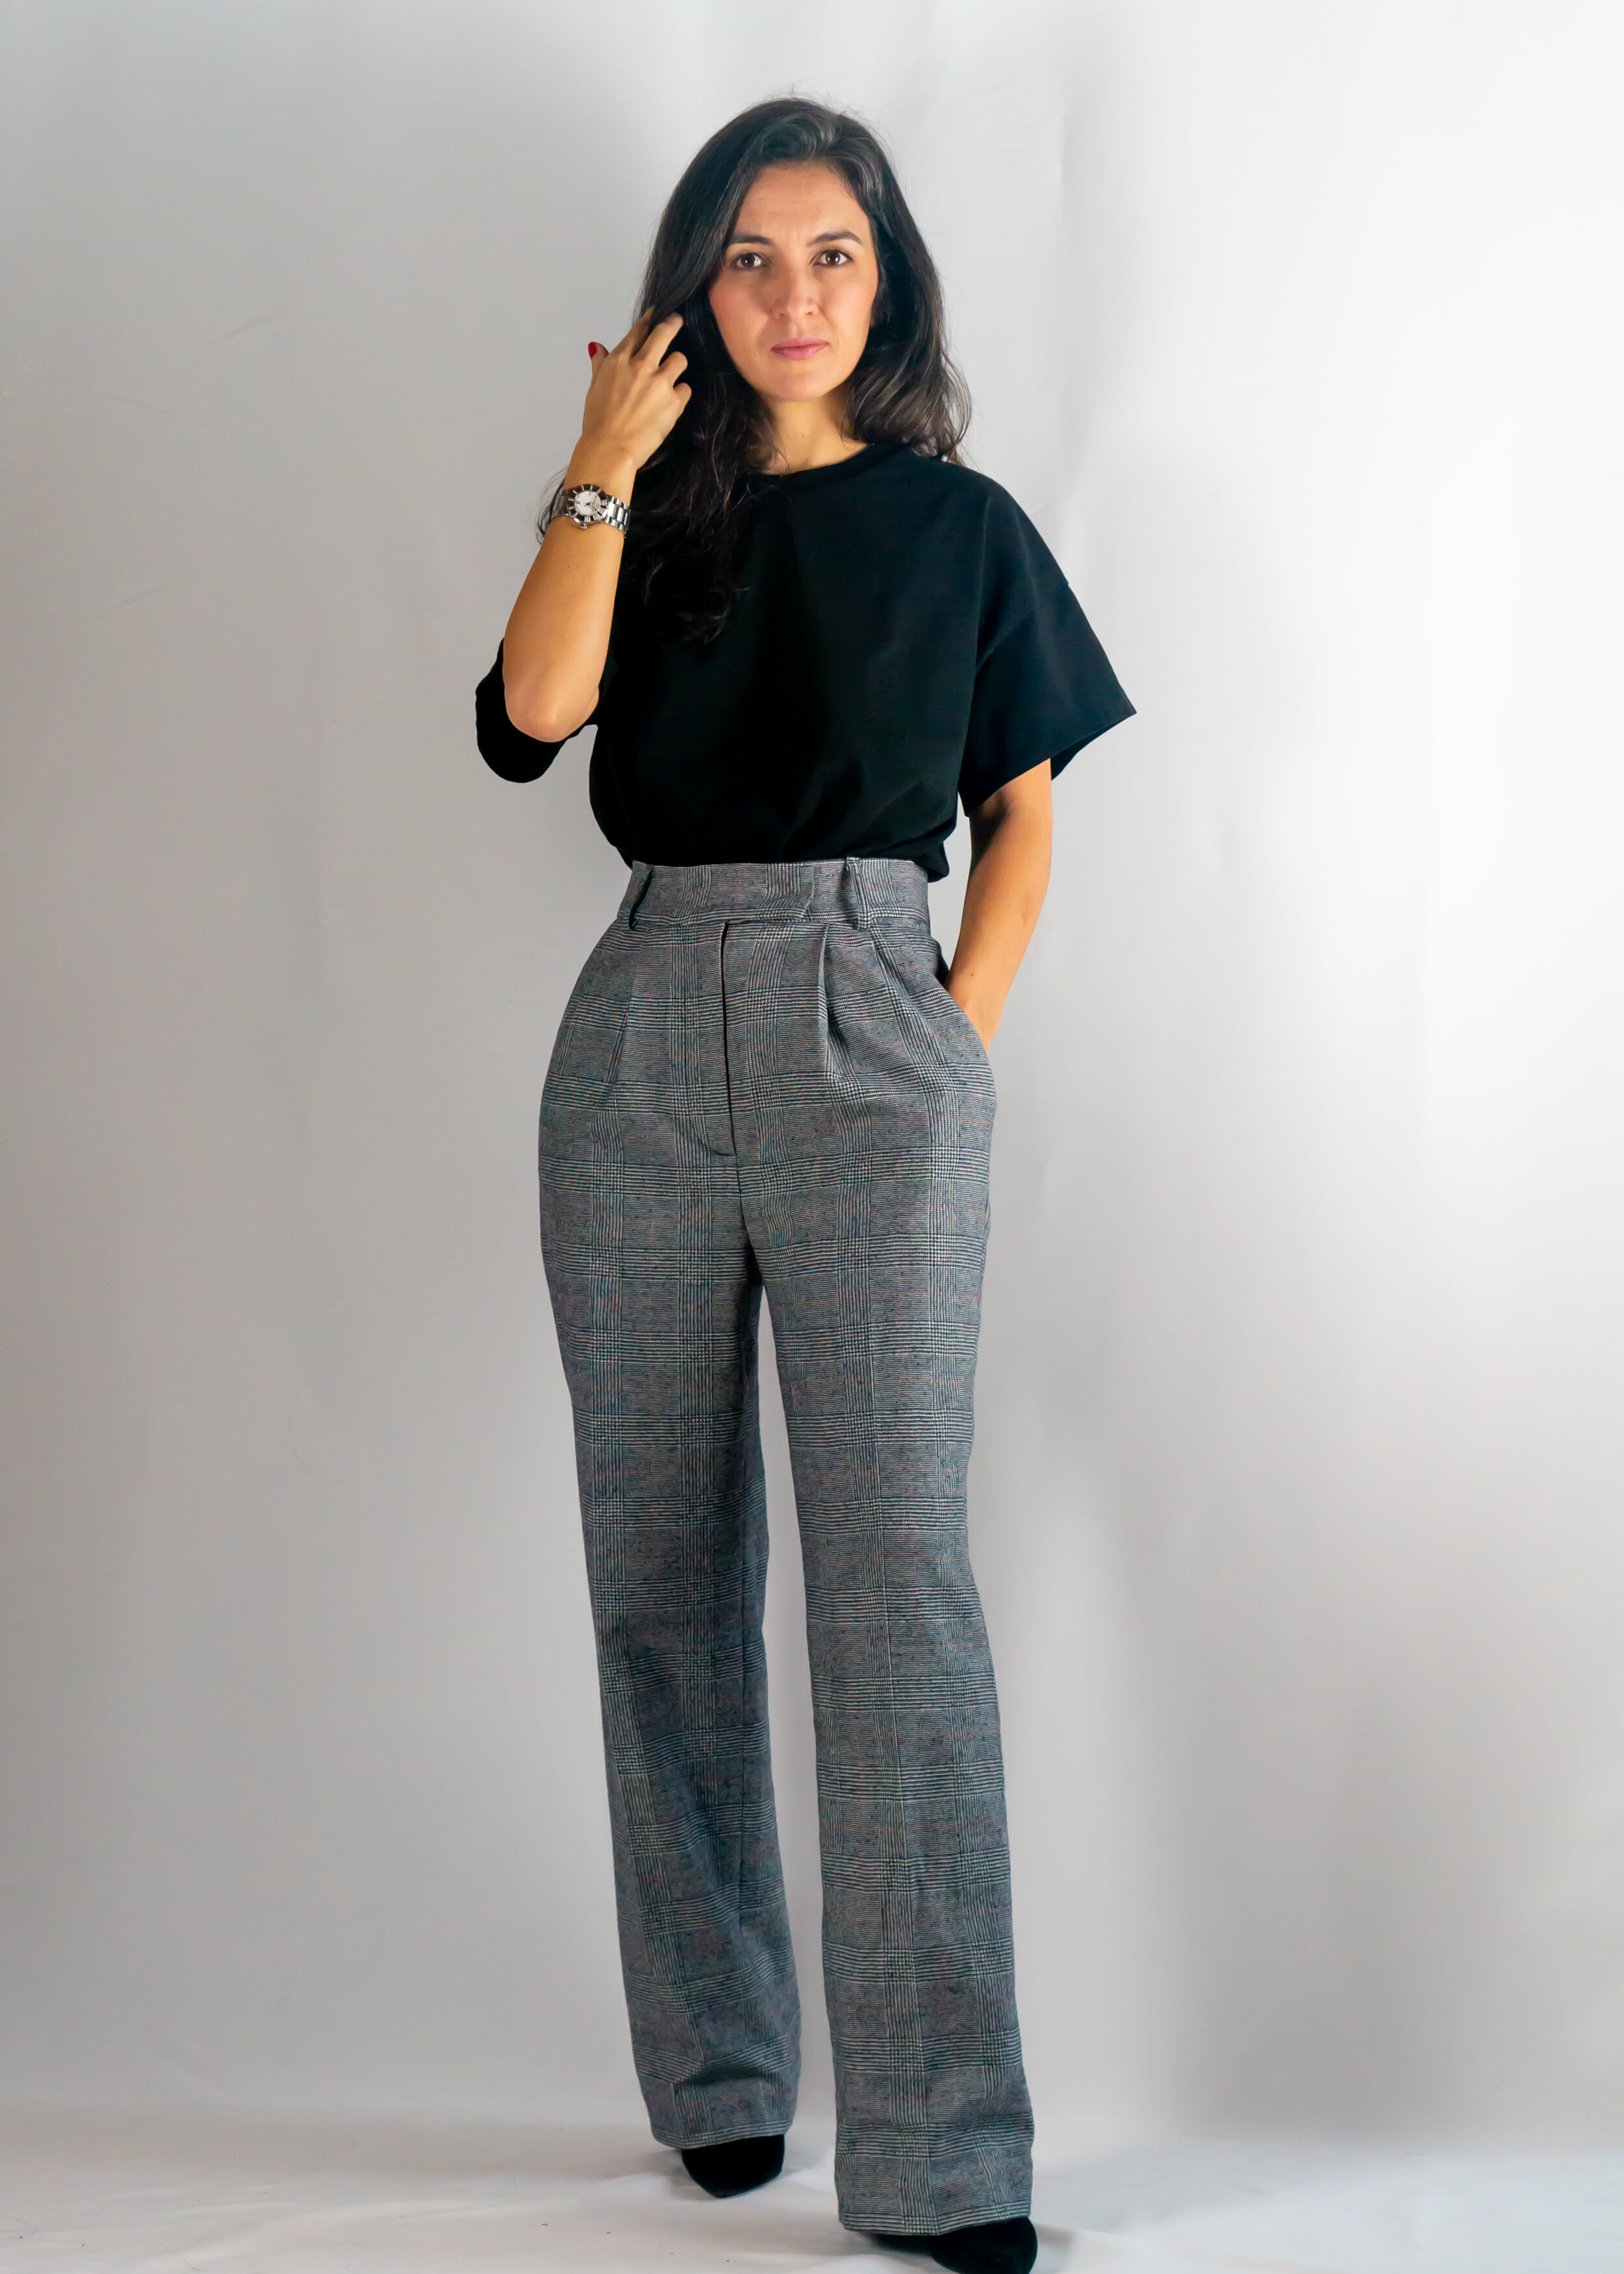 Make Easy  comfortable Straight pants  sewing pattern  Sew Guide  Pants  sewing pattern Sewing techniques Sewing tutorials clothes